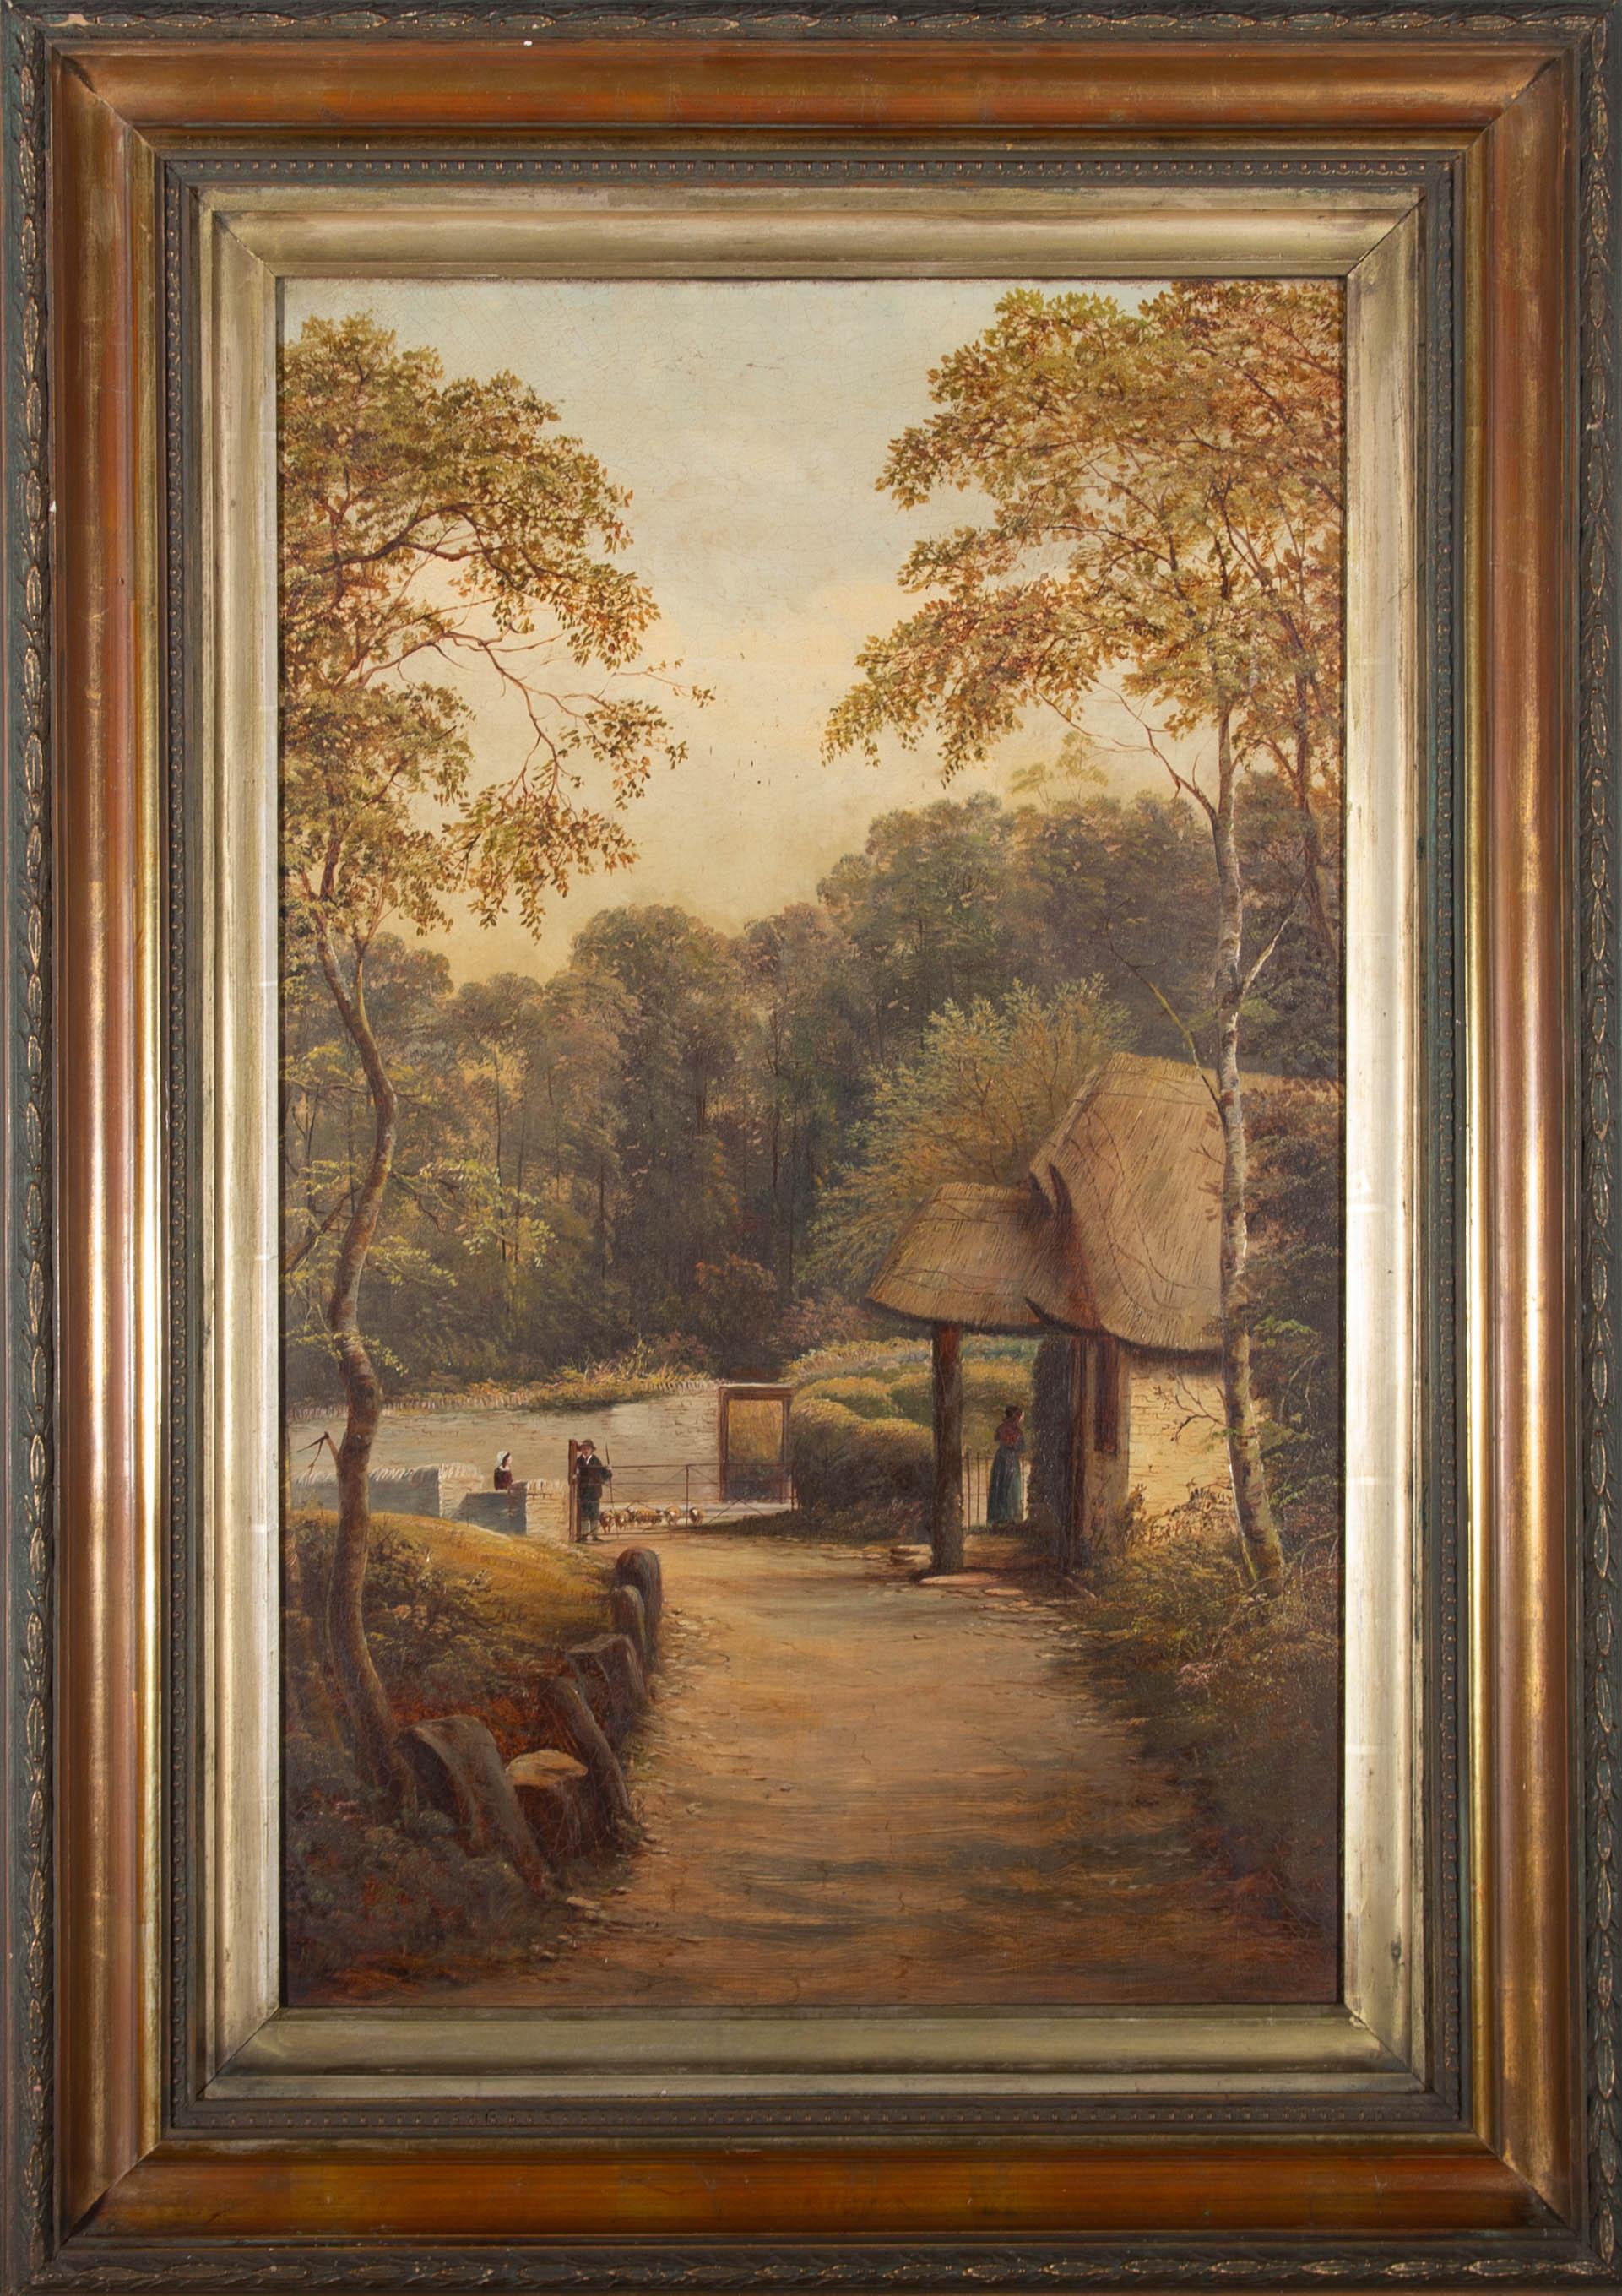 Unknown Landscape Painting - Late 19th Century Oil - Pastoral Life